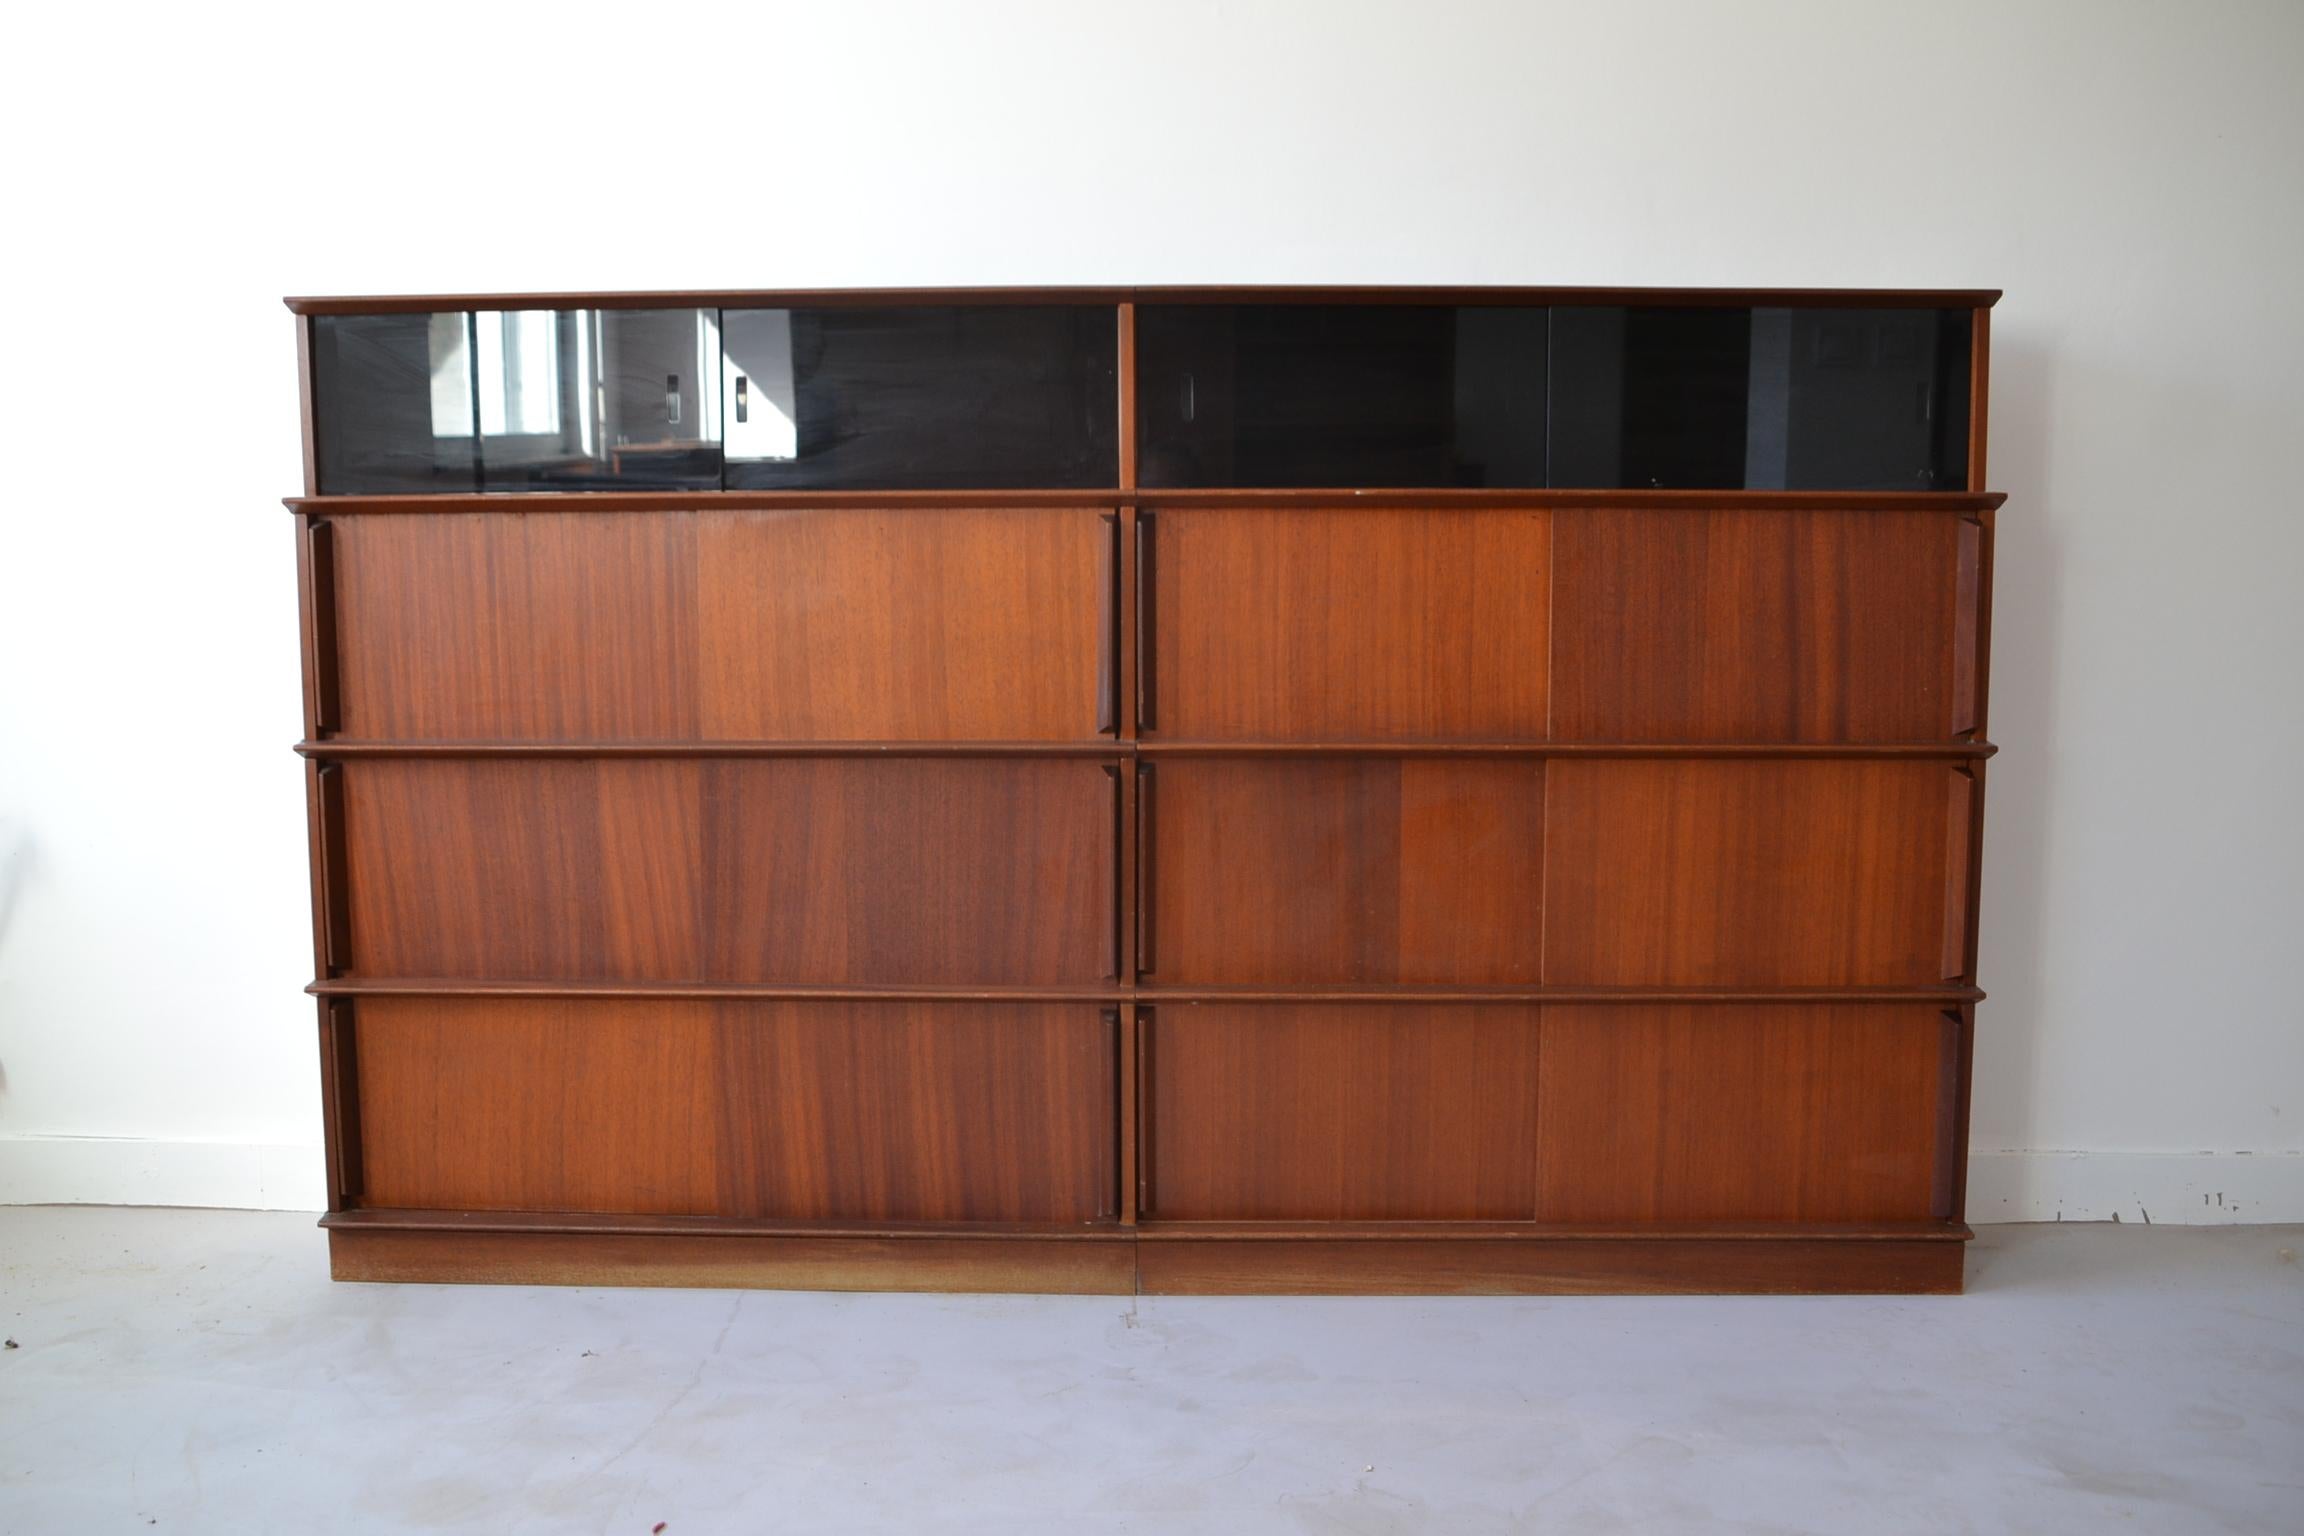 This is a vintage 1960s bookcase. Designed by Didier Rozaffy for Oscar Furniture, a 1950s French manufacturer pioneering modular furniture.
Easily removable thanks to a typical Oscar system, interlocking and fixing by stud. This library is composed